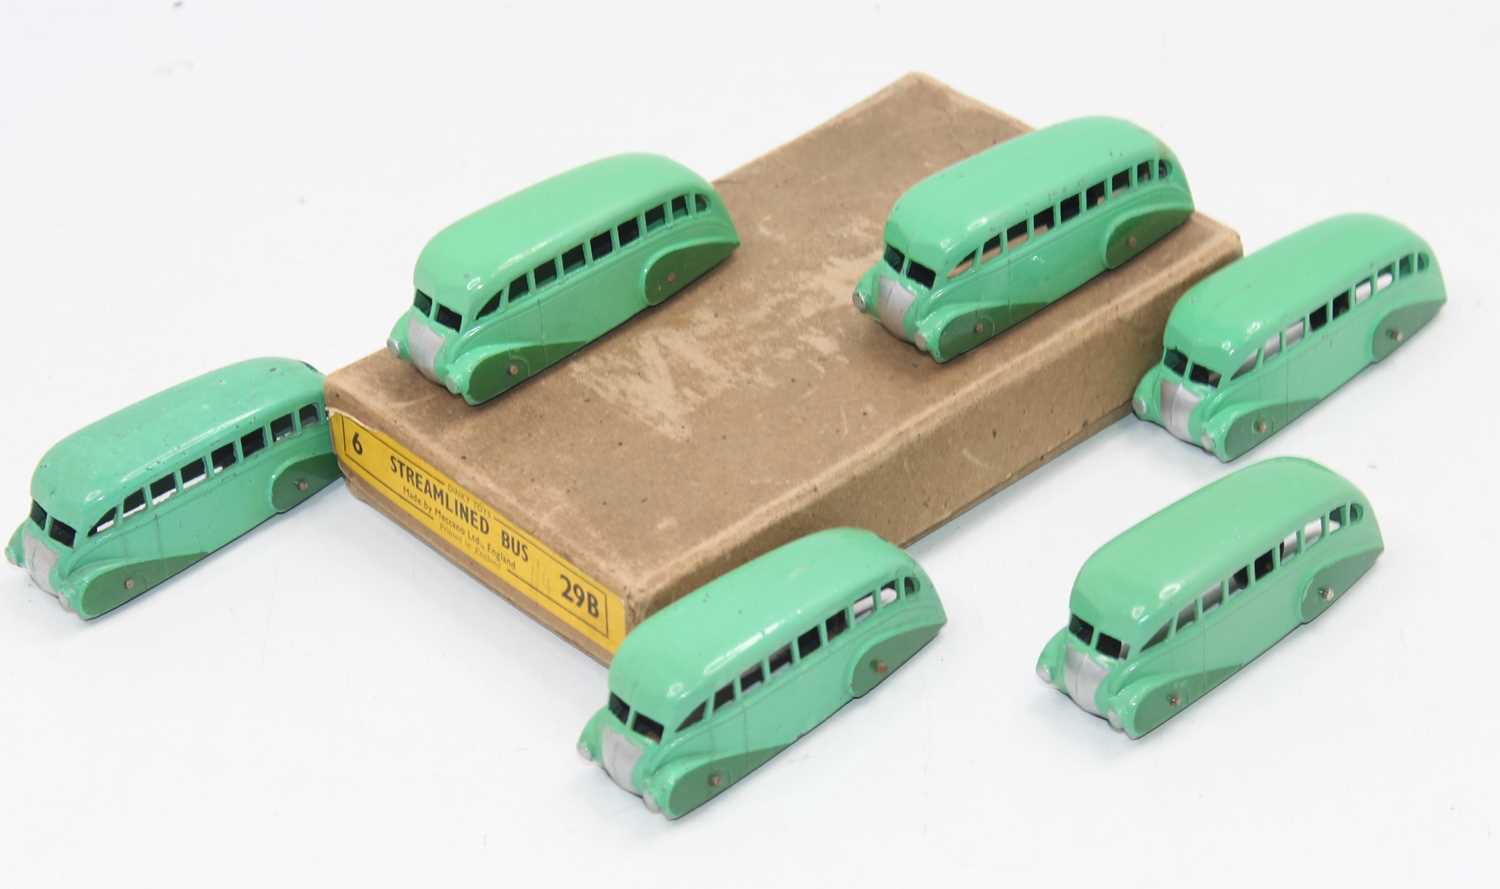 Dinky Toys 29b original Trade box containing 6 "Streamlined" buses, in two-tone green without